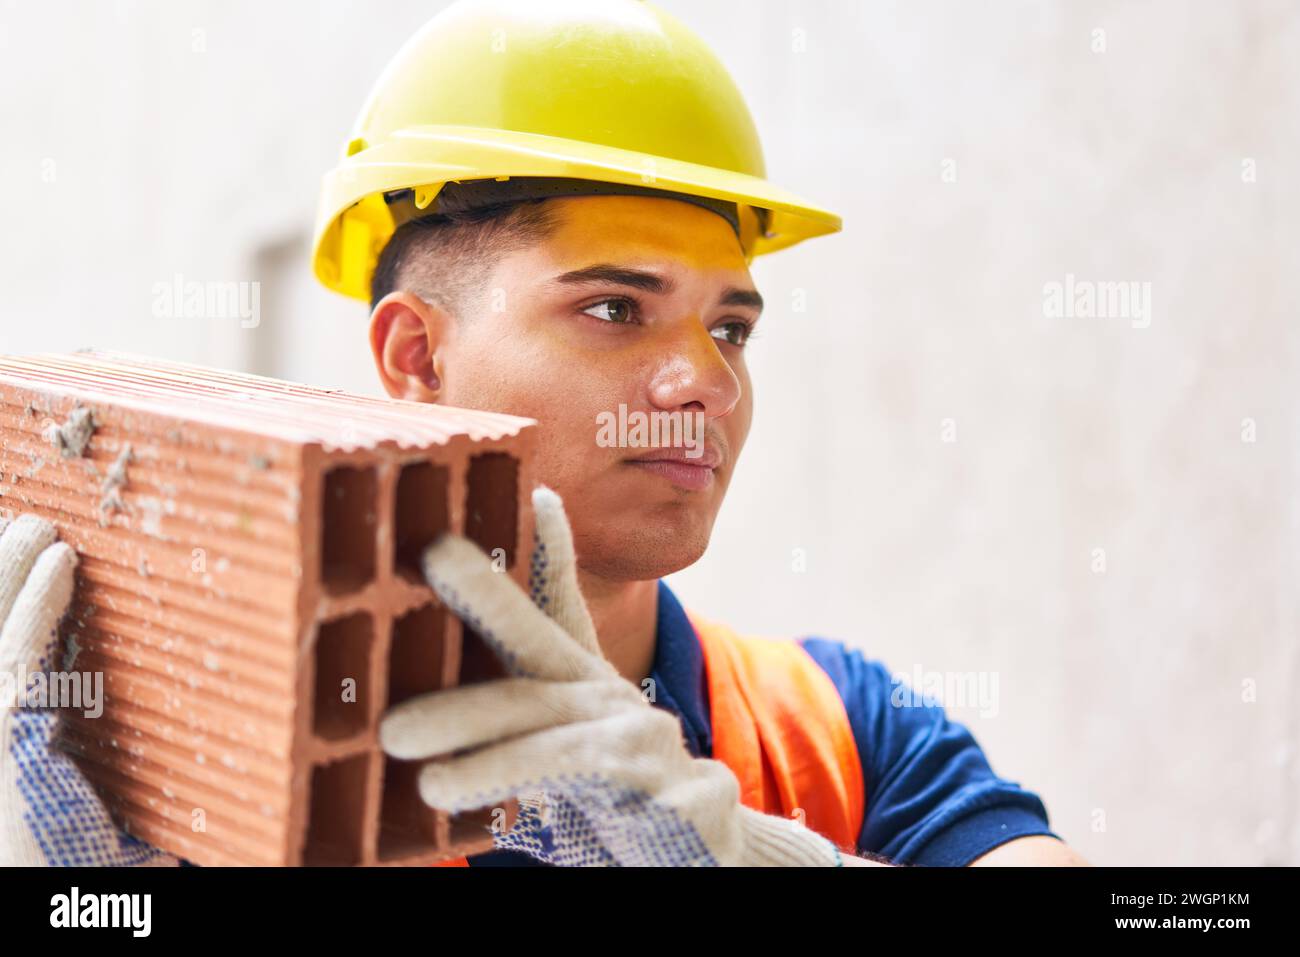 Confident male bricklayer wearing hardhat carrying brick Stock Photo